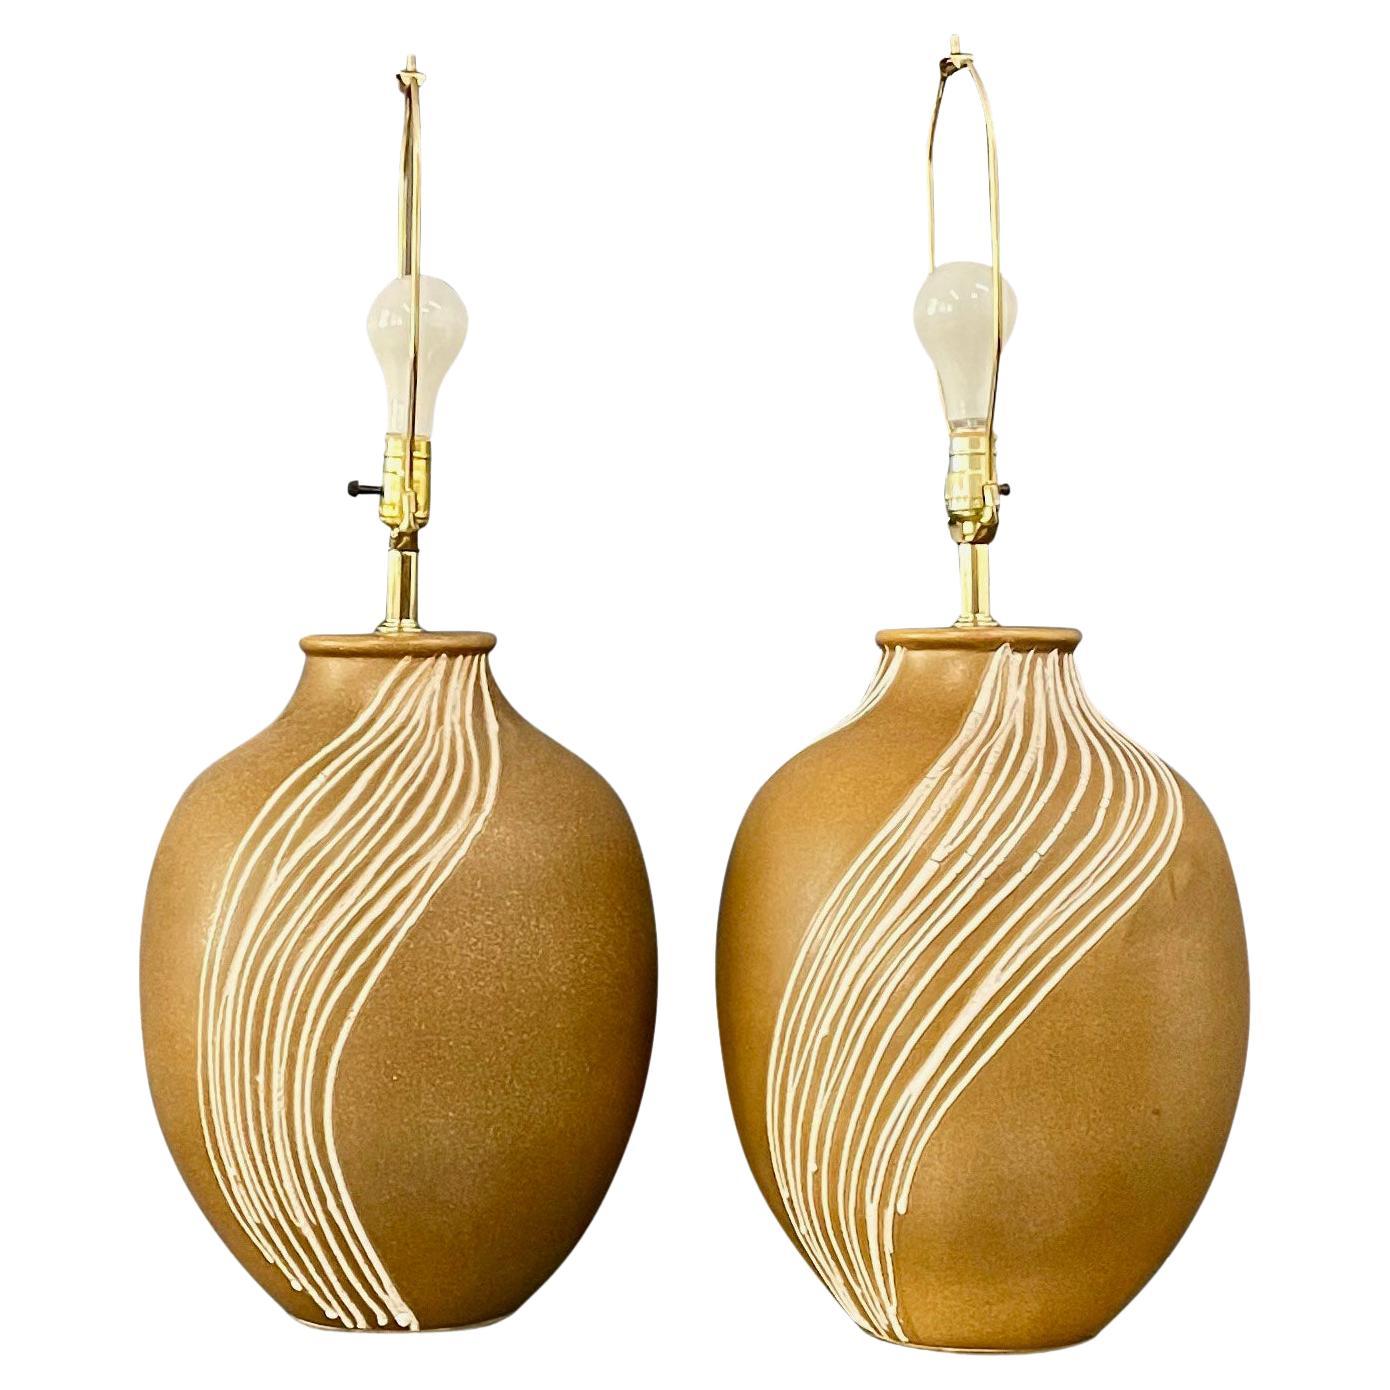 Mid Century Pair of Ceramic Caramel Colored Lamps with White Appliquéd Stripes For Sale